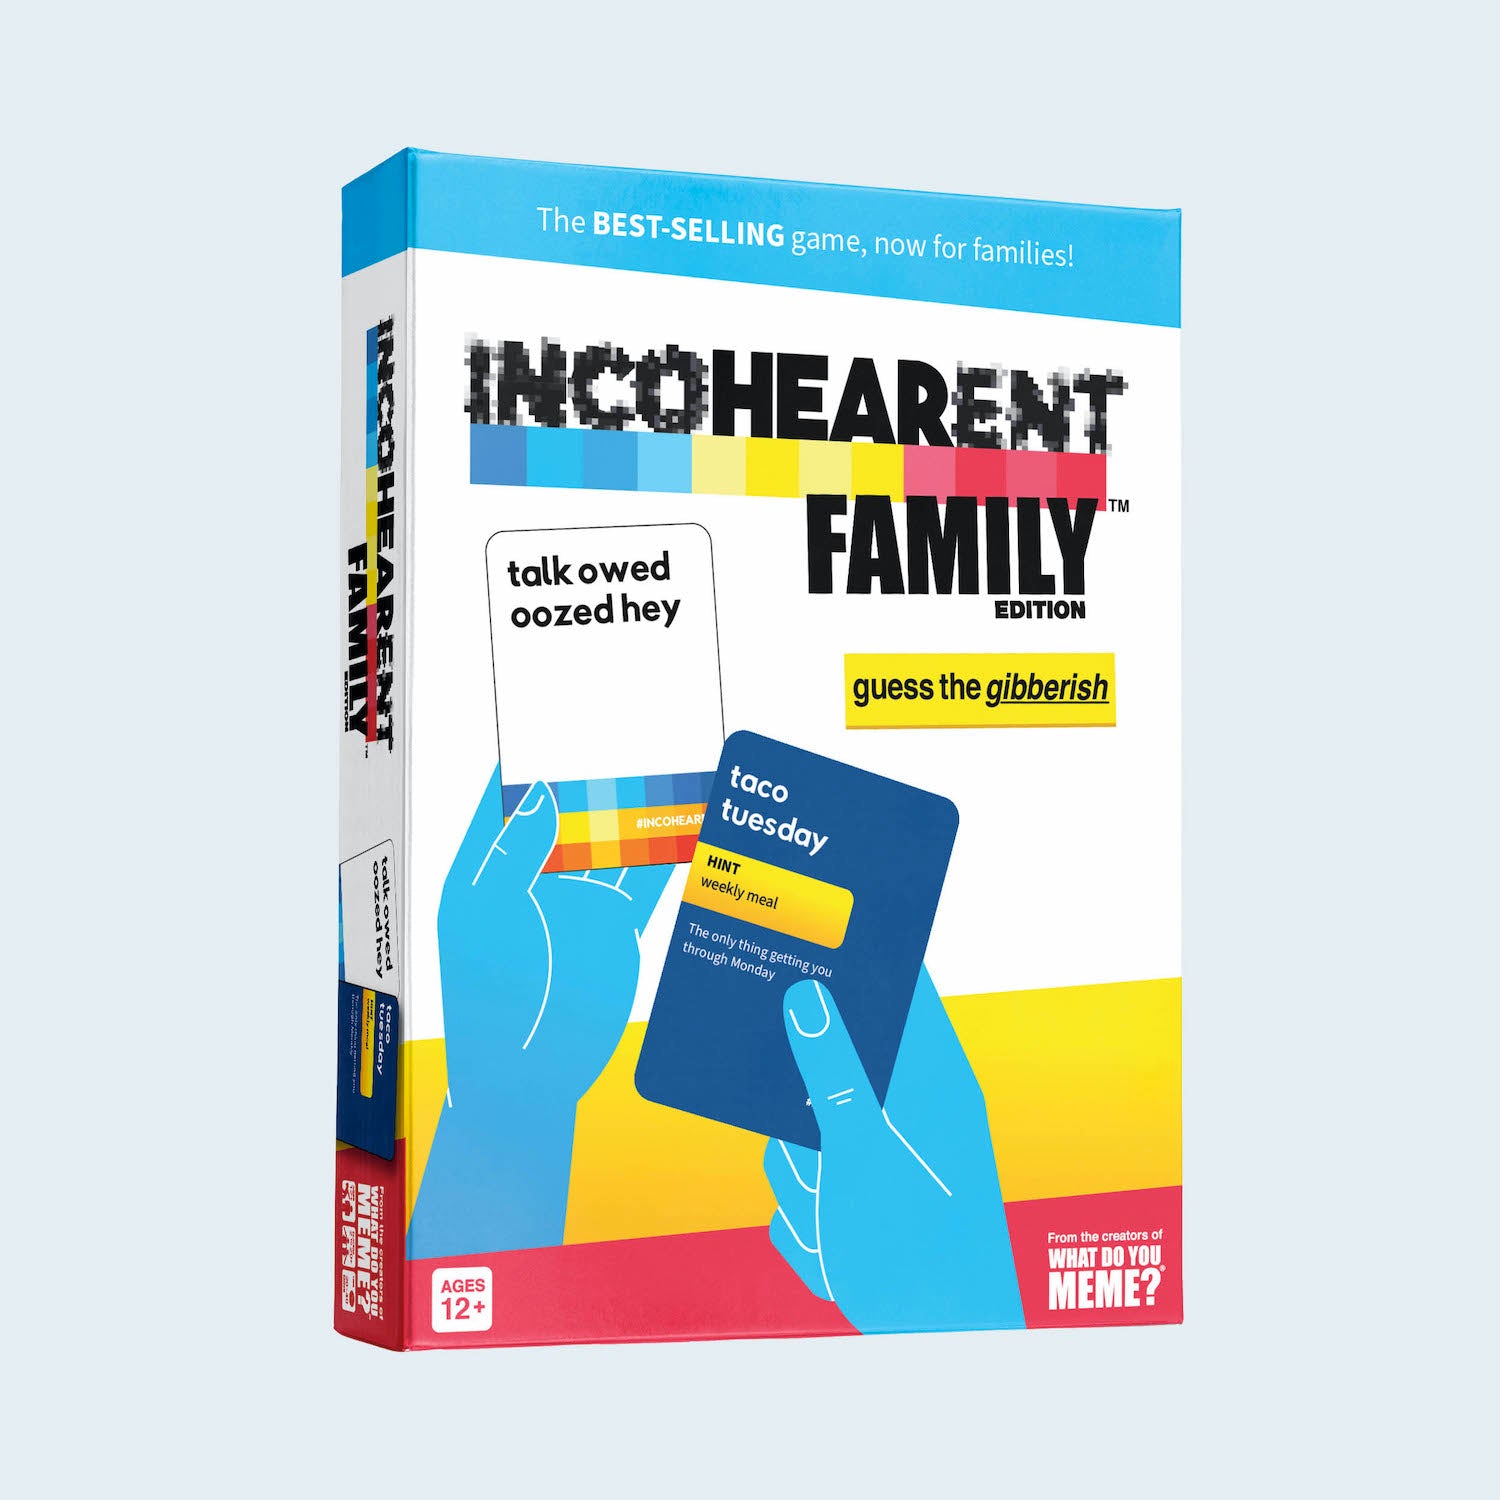 incohearent-family-edition-game-box-and-game-play-01-what-do-you-meme-by-relatable